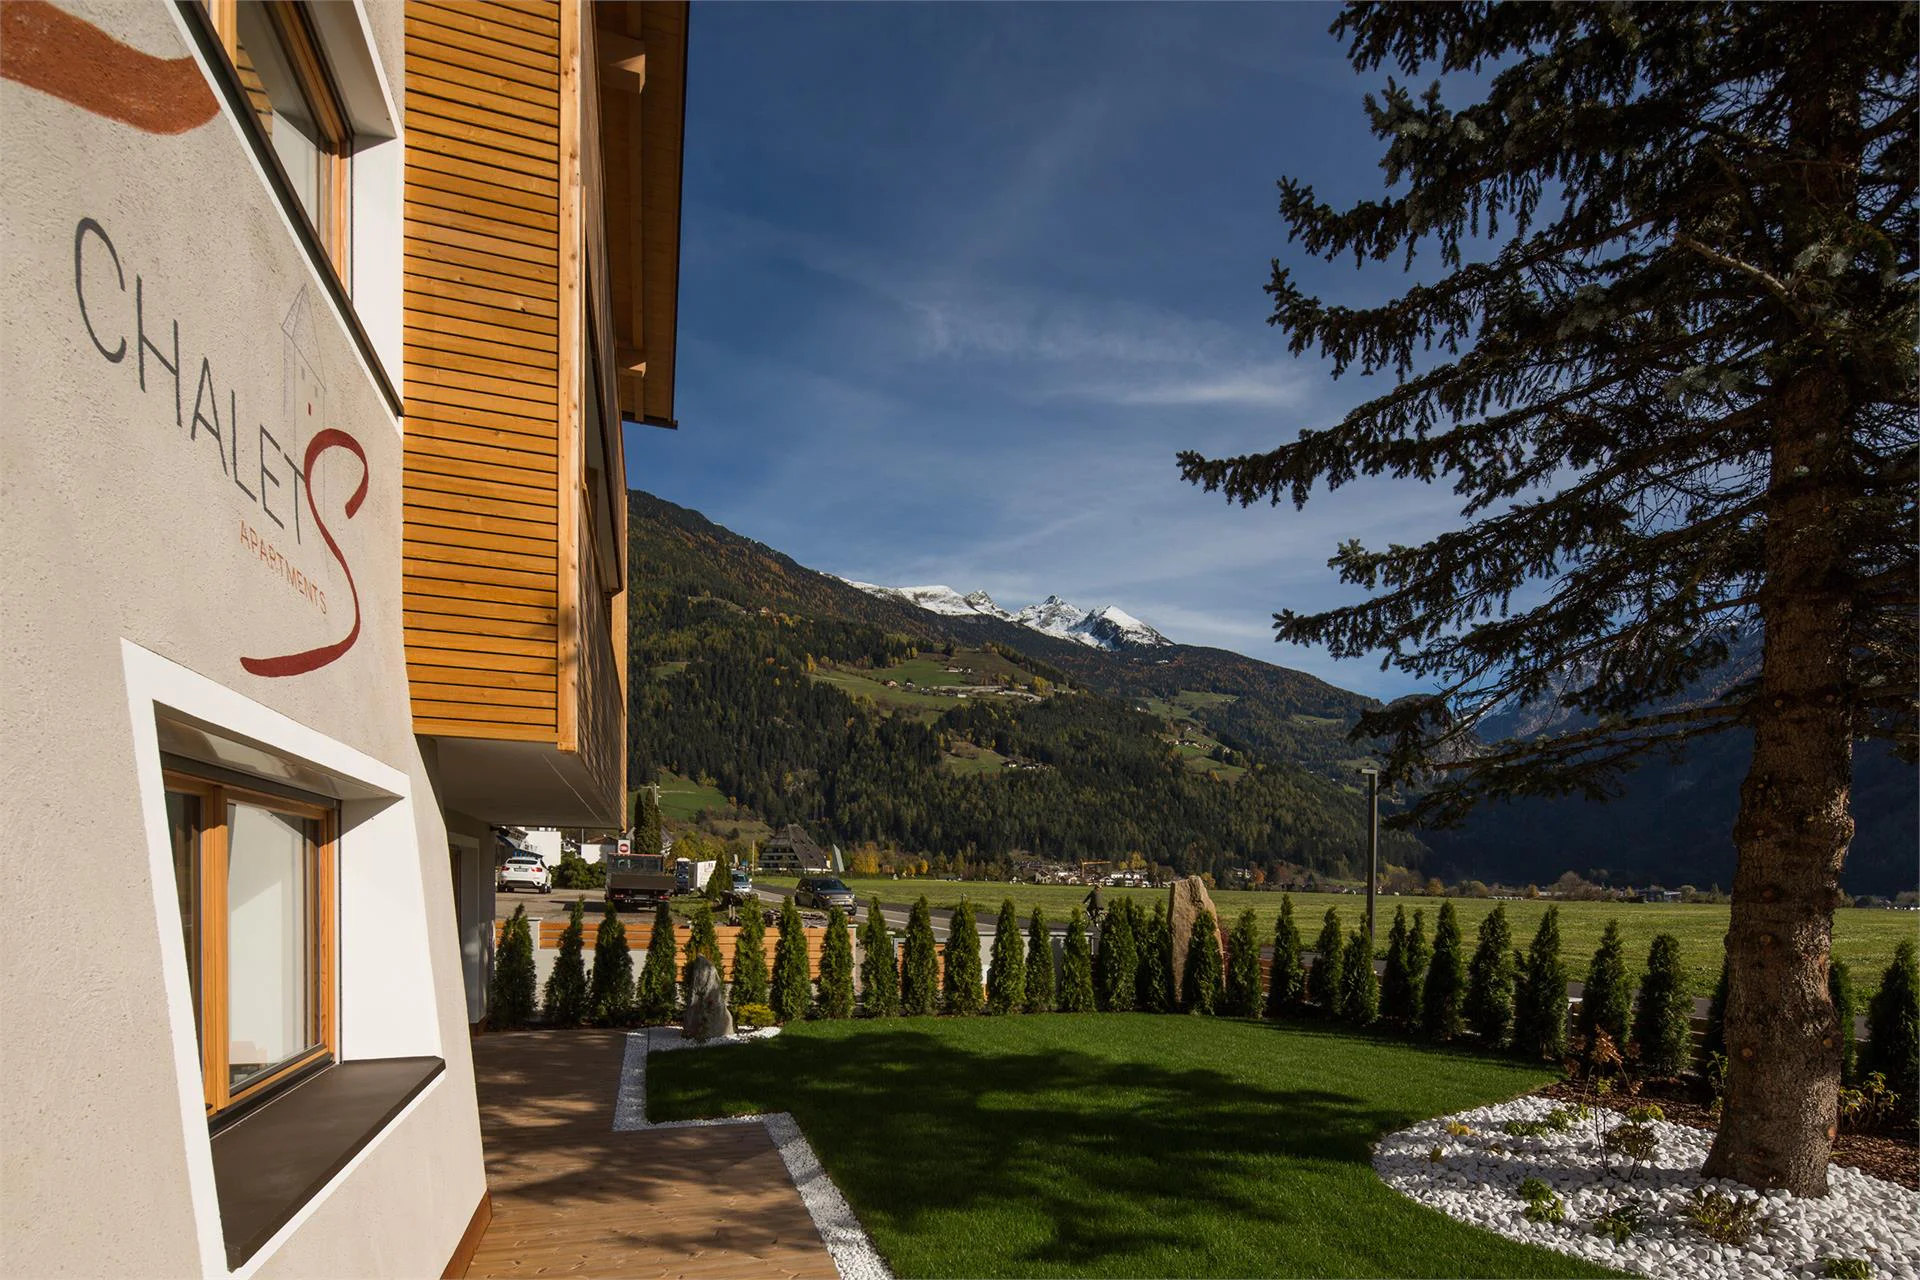 Chalet S Apartments Sand in Taufers/Campo Tures 2 suedtirol.info